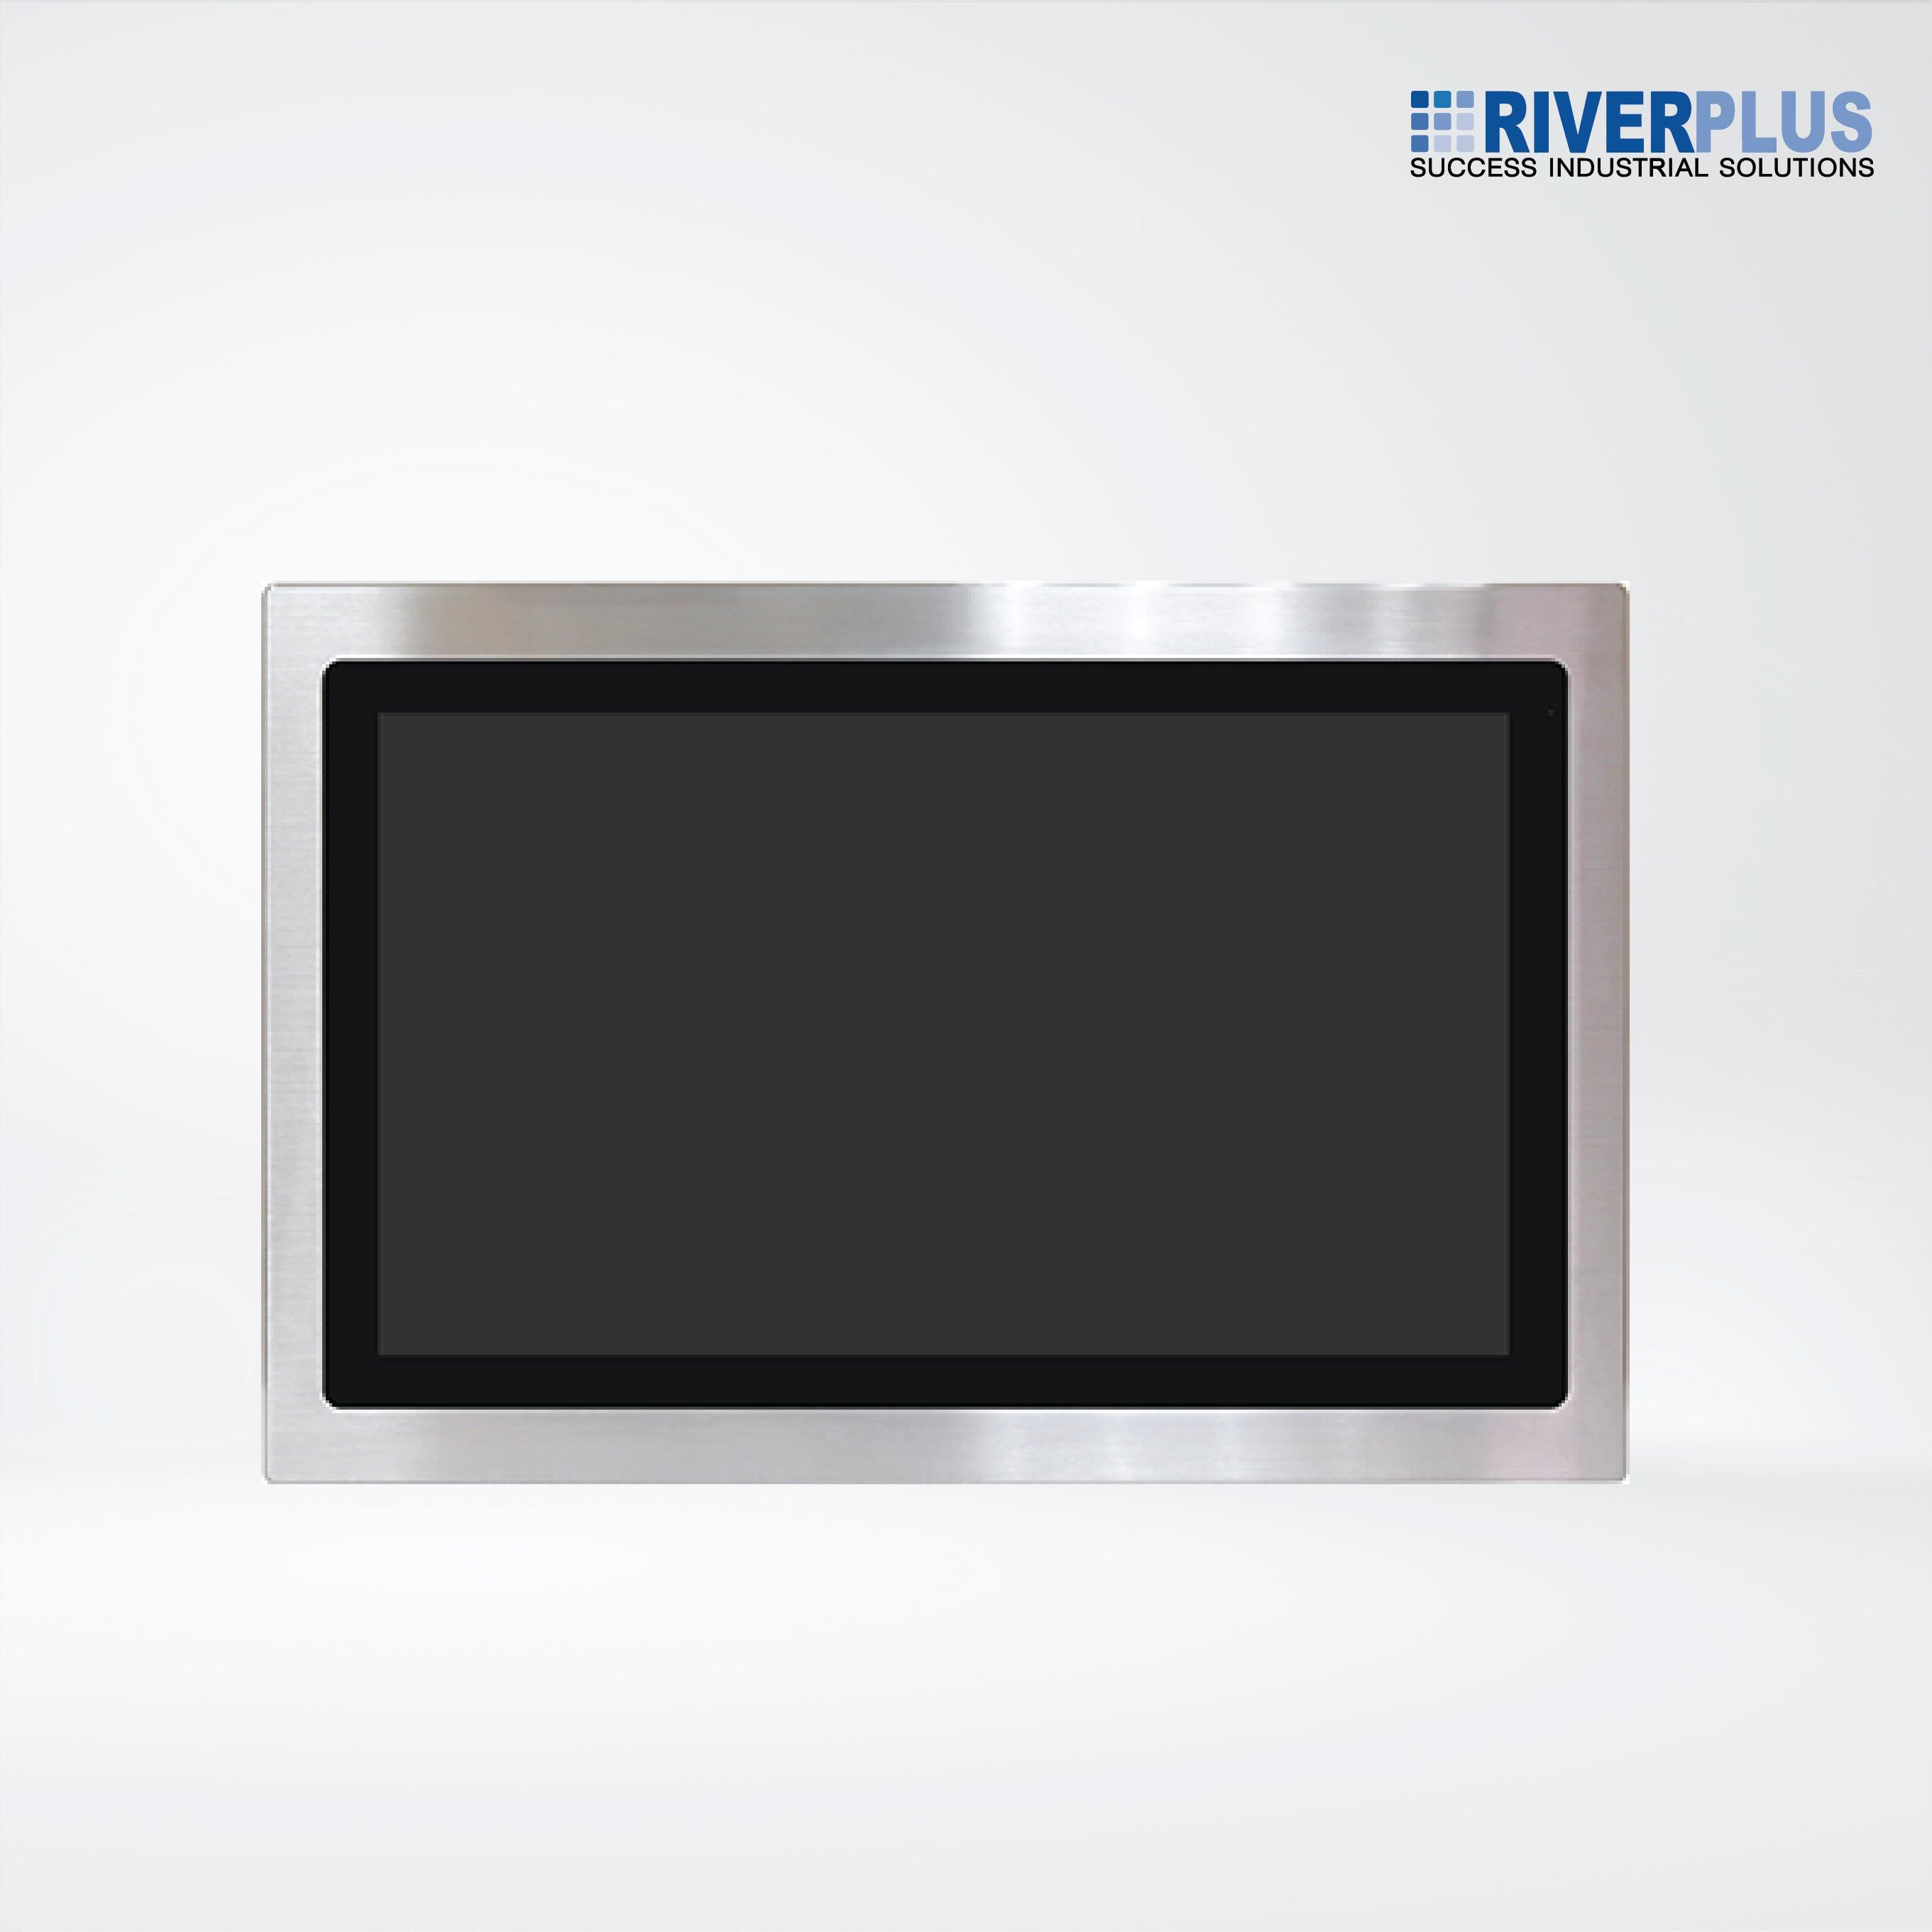 FABS-121GH 21.5” Flat Front Panel IP66 Stainless Chassis Display - Riverplus